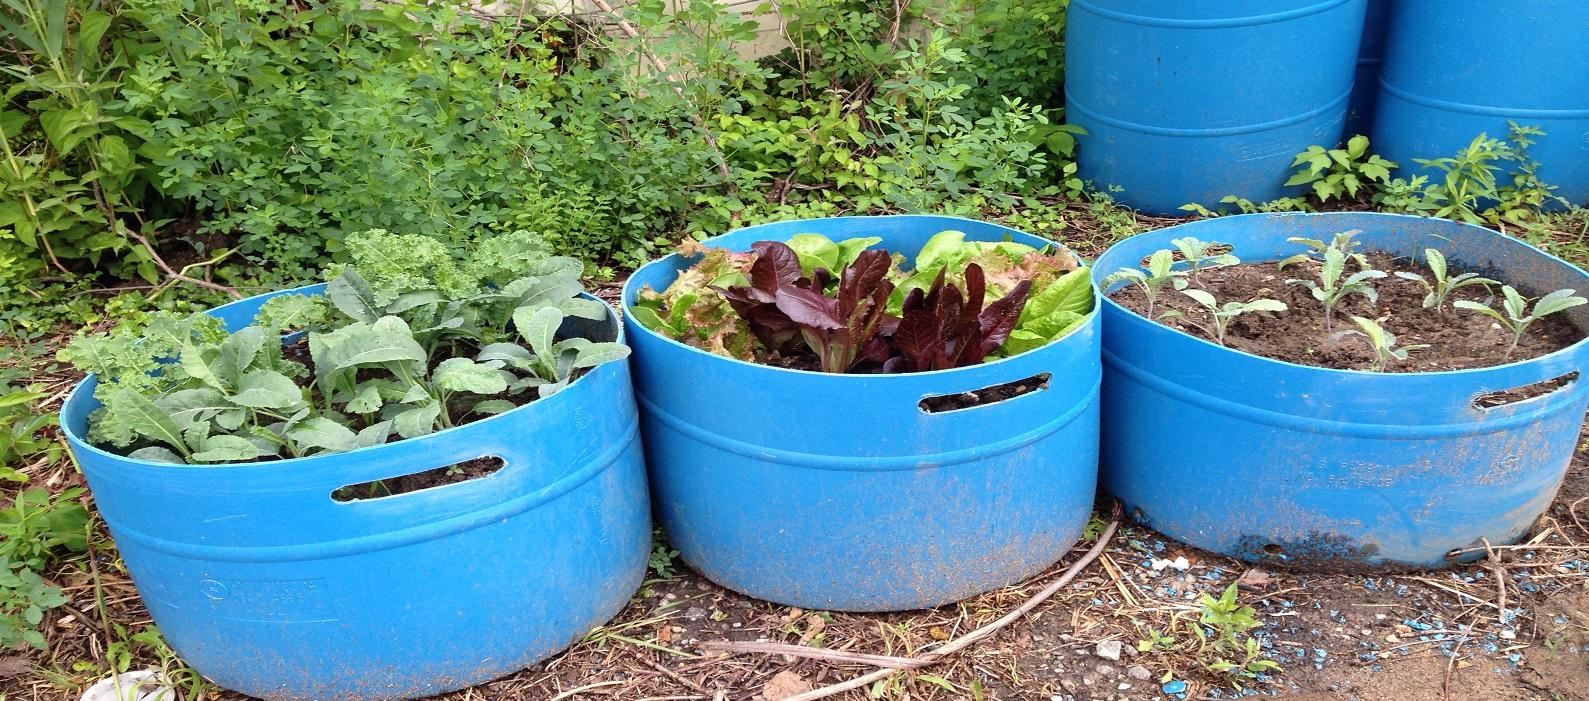 lettuce growing in containers